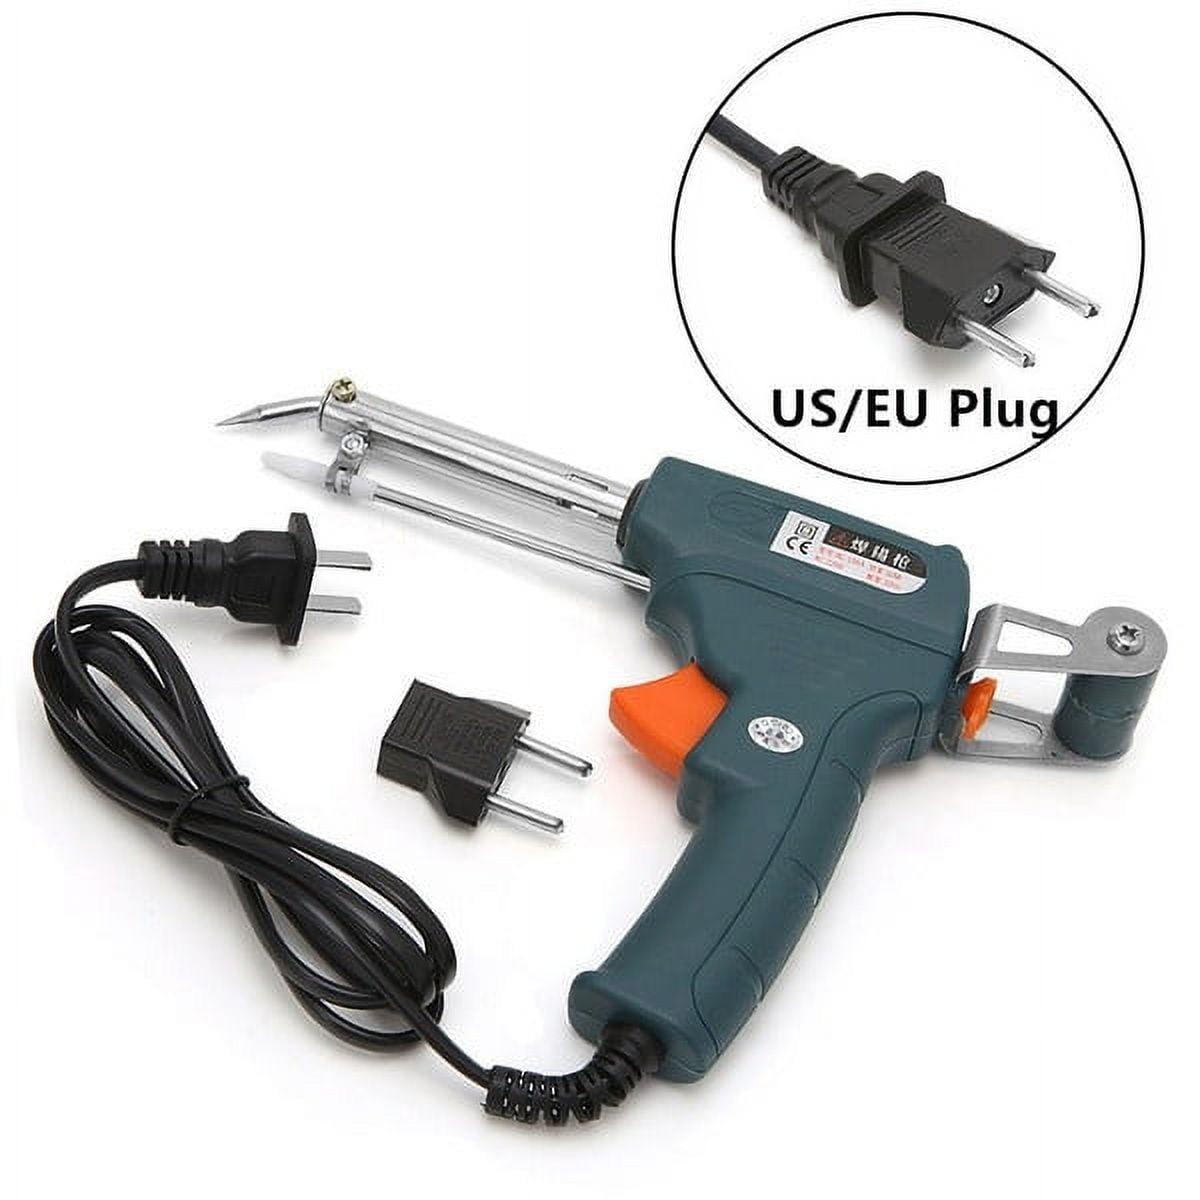 XPR3SS 60W Soldering Iron Kit Heating Gun Handfree Automatic feed Tin 60 W  Simple Price in India - Buy XPR3SS 60W Soldering Iron Kit Heating Gun  Handfree Automatic feed Tin 60 W